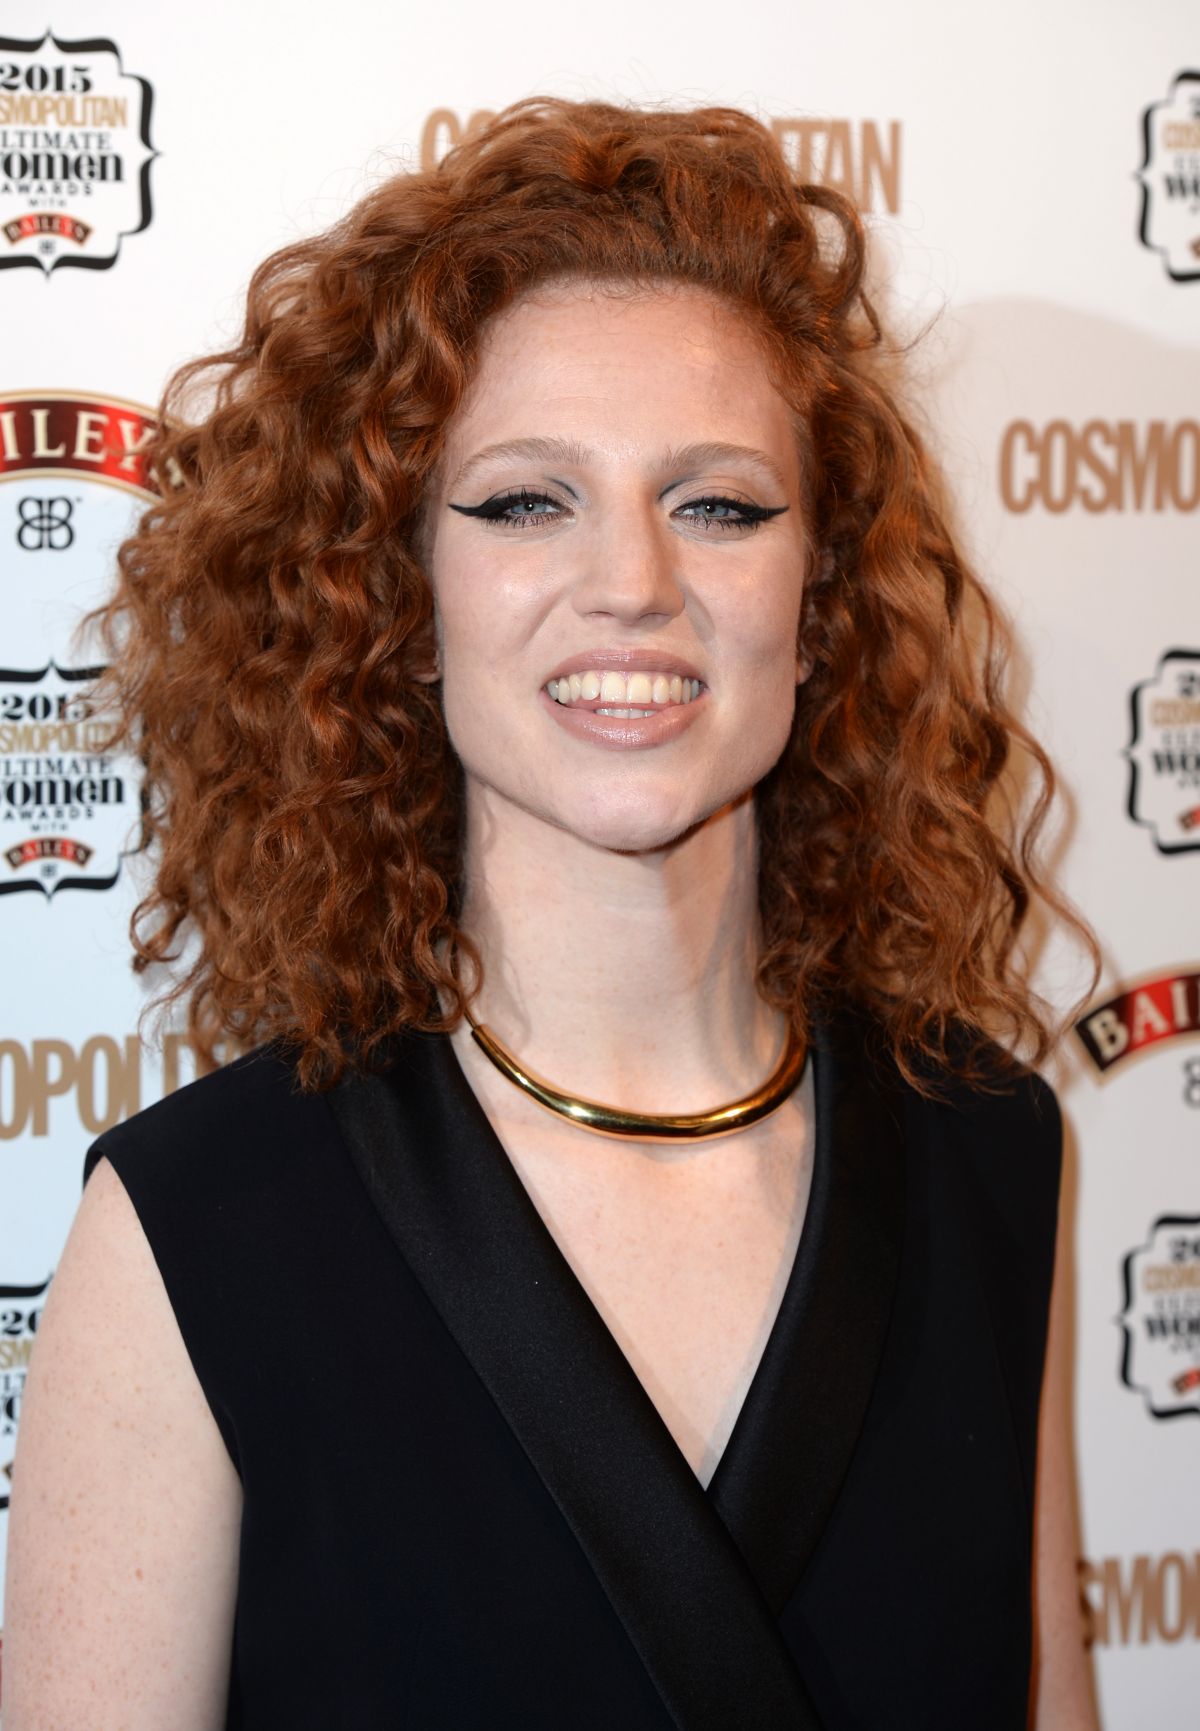 JESS GLYNNE at Cosmopolitan Ultimate Women of the Year Awards in London 12/03/2015 ...